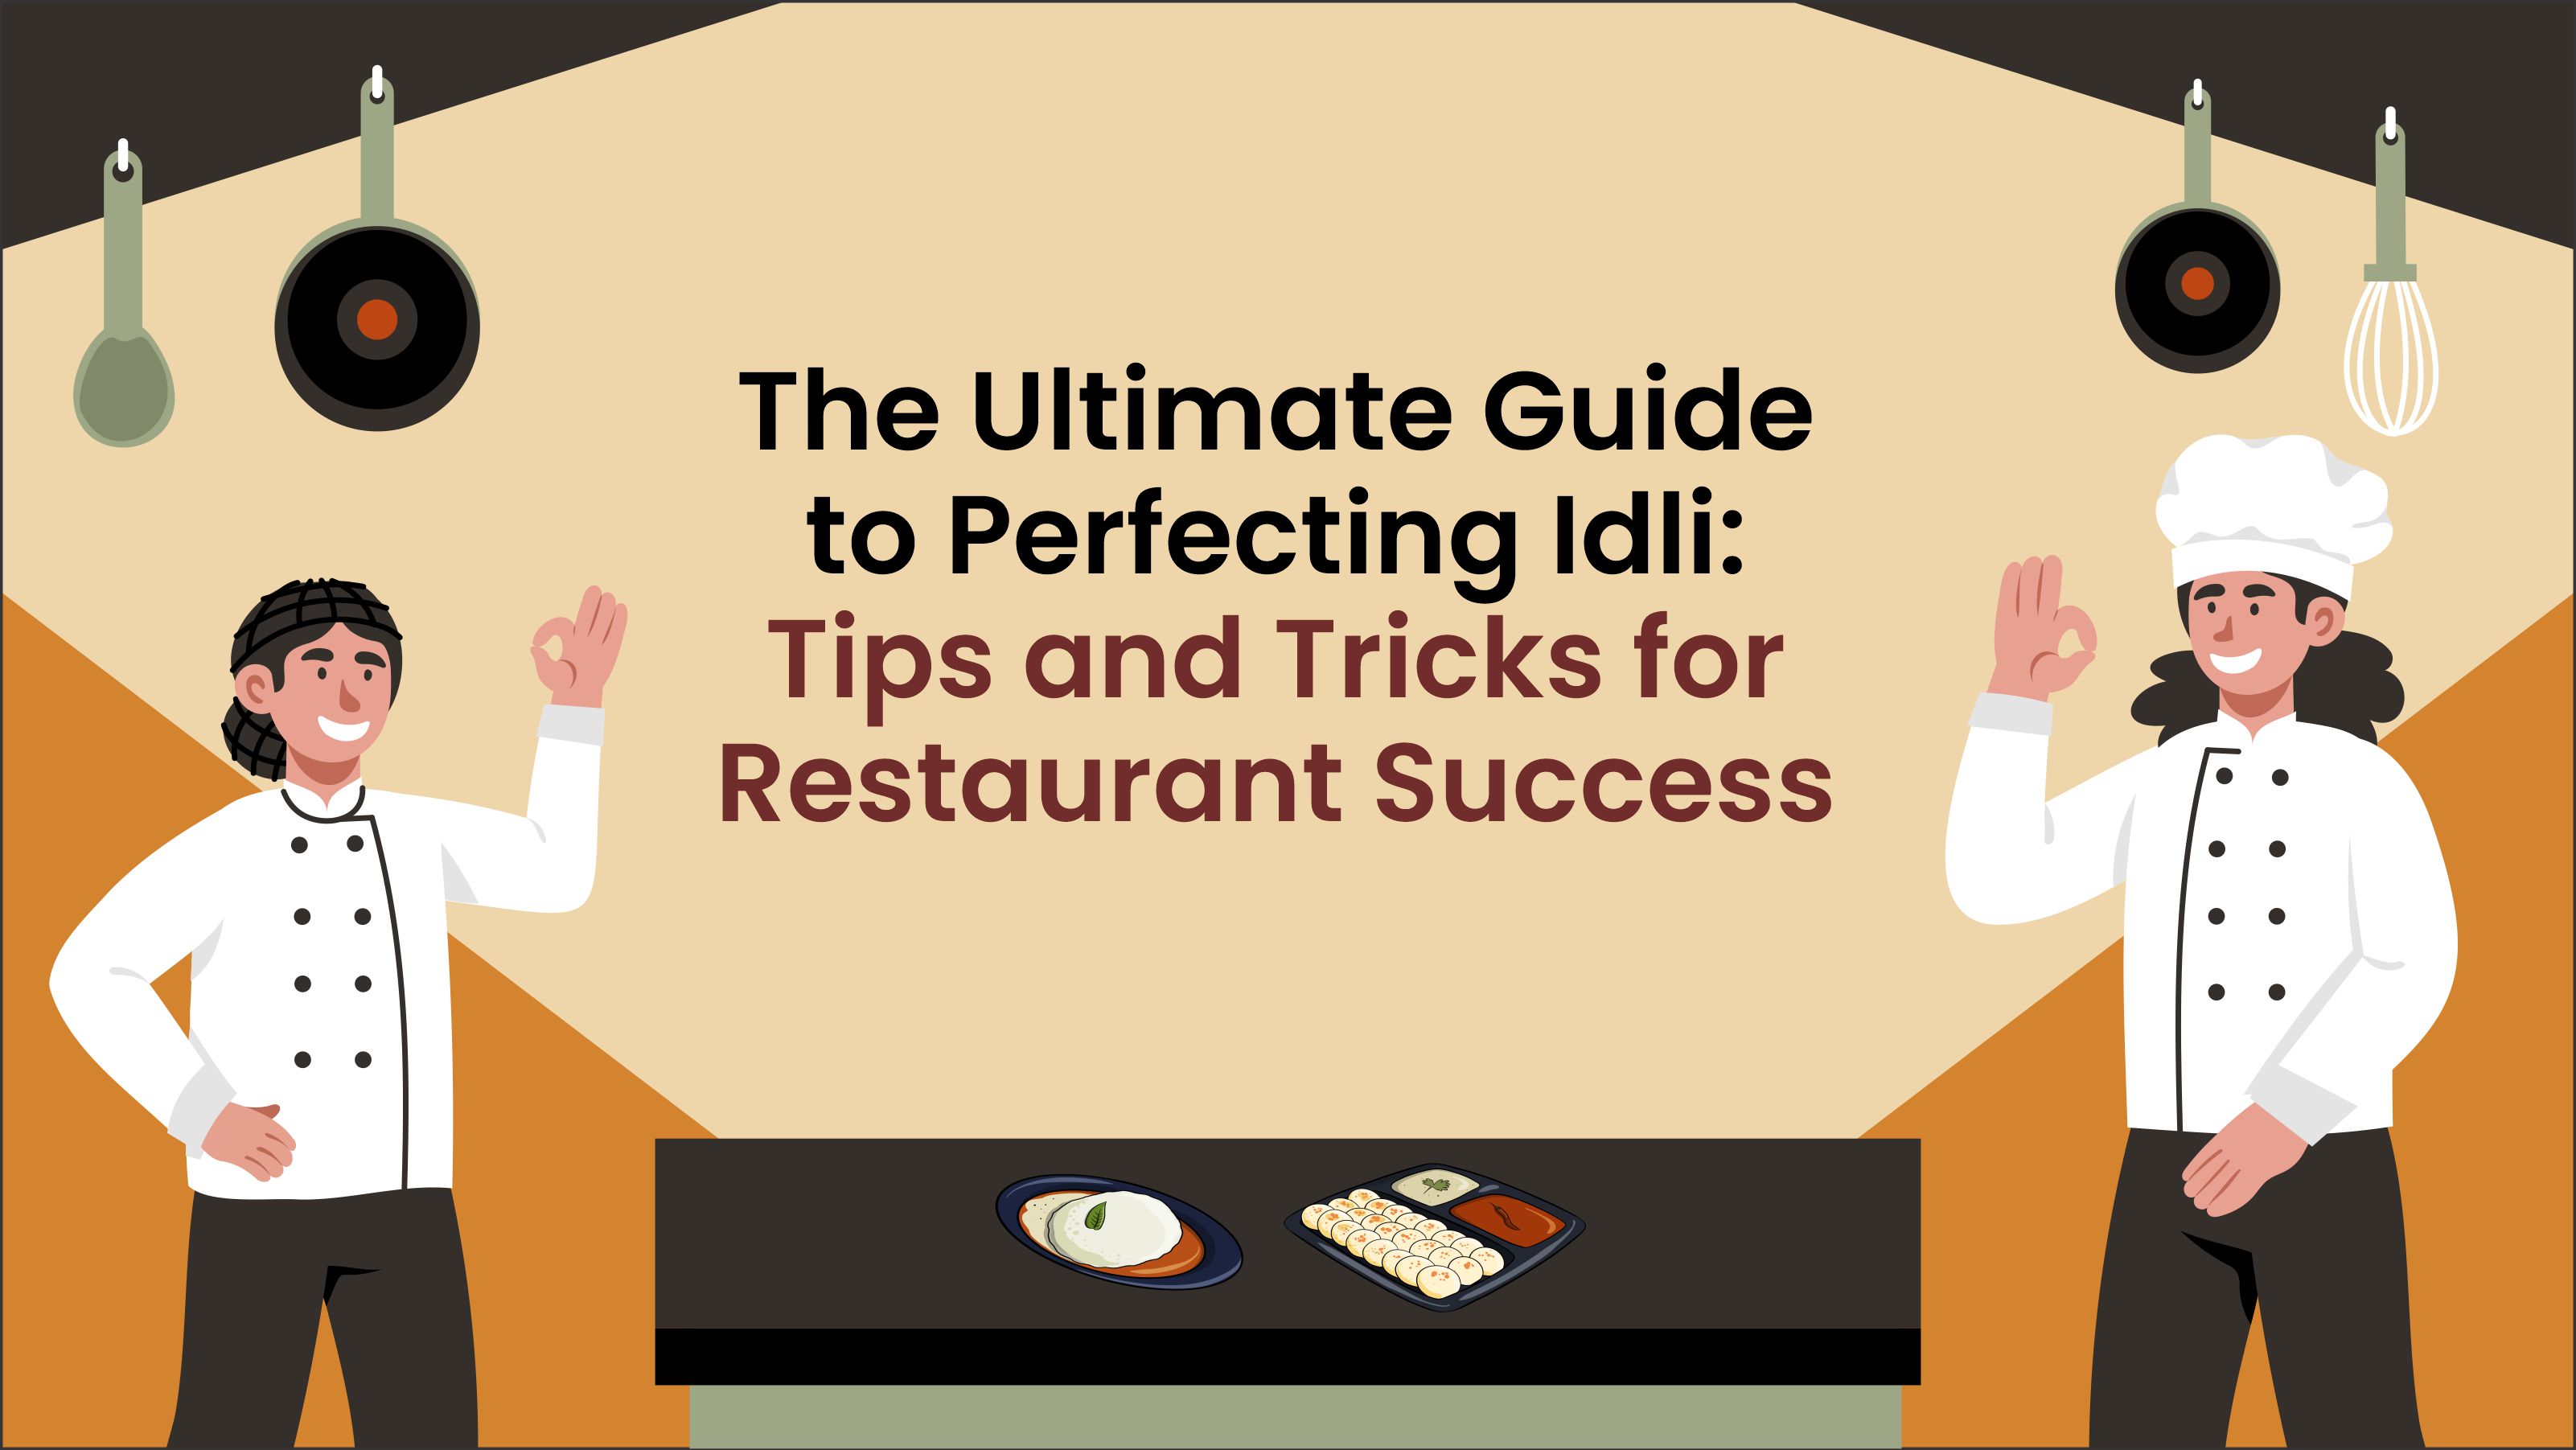 The Ultimate Guide to Perfecting Idli: Tips and Tricks for Restaurant Success